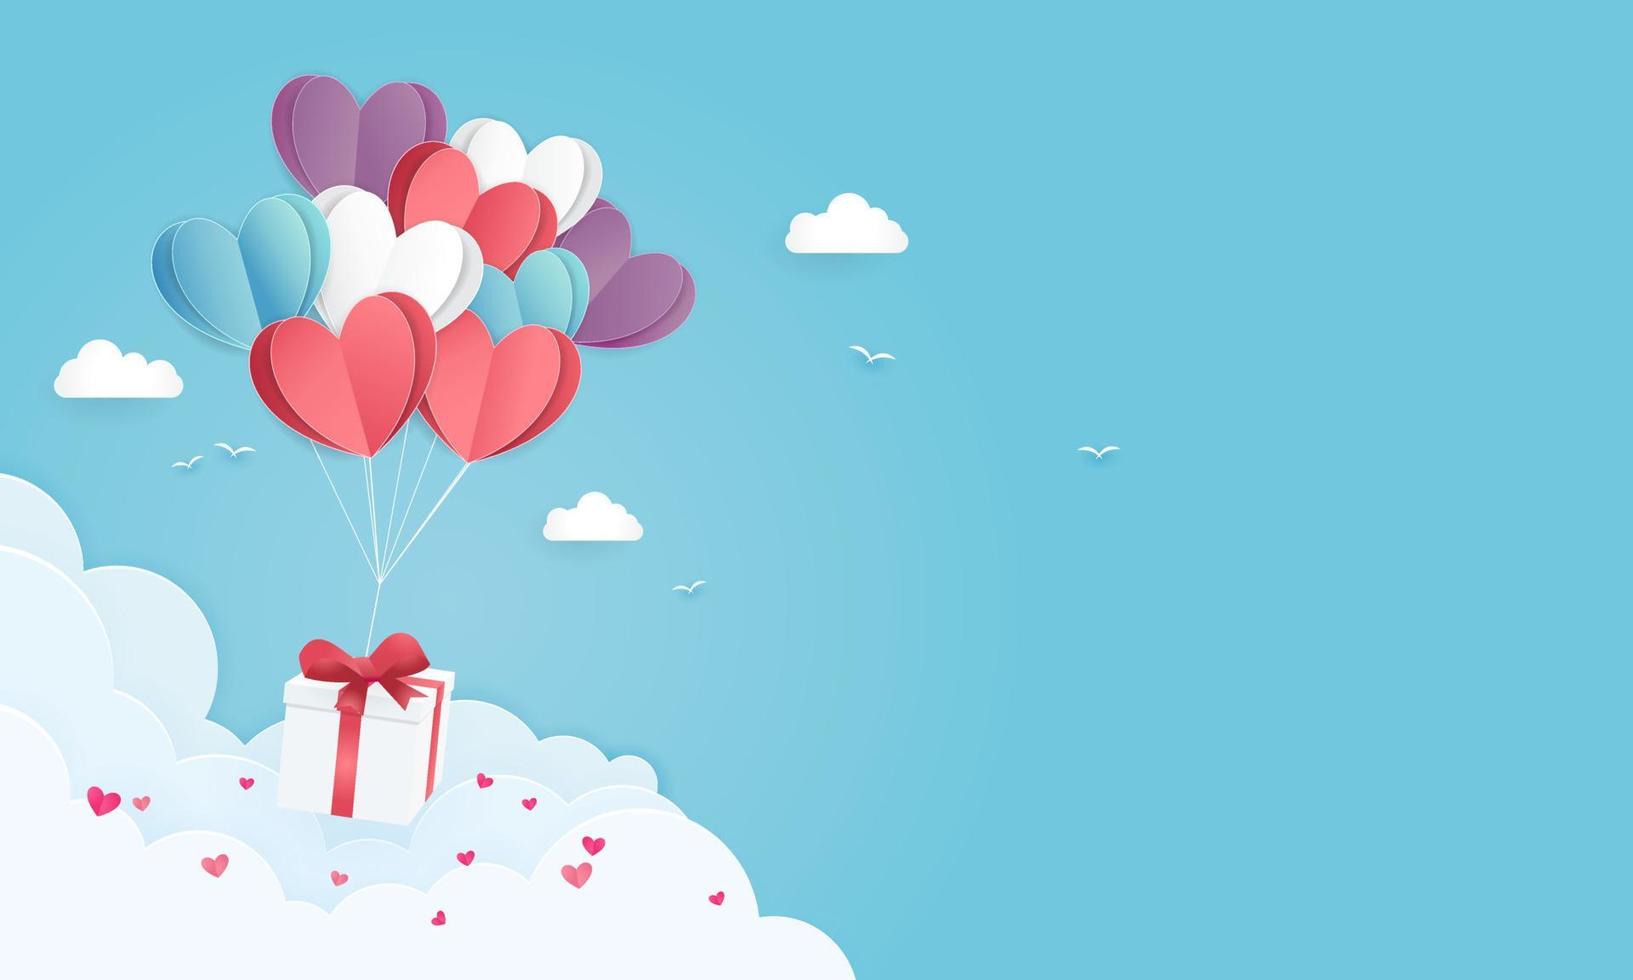 illustration of love and valentine day with paper heart balloon and gift box float on the blue sky. Can be used for Wallpaper, flyers, invitation, posters, banners. Paper cut style. vector